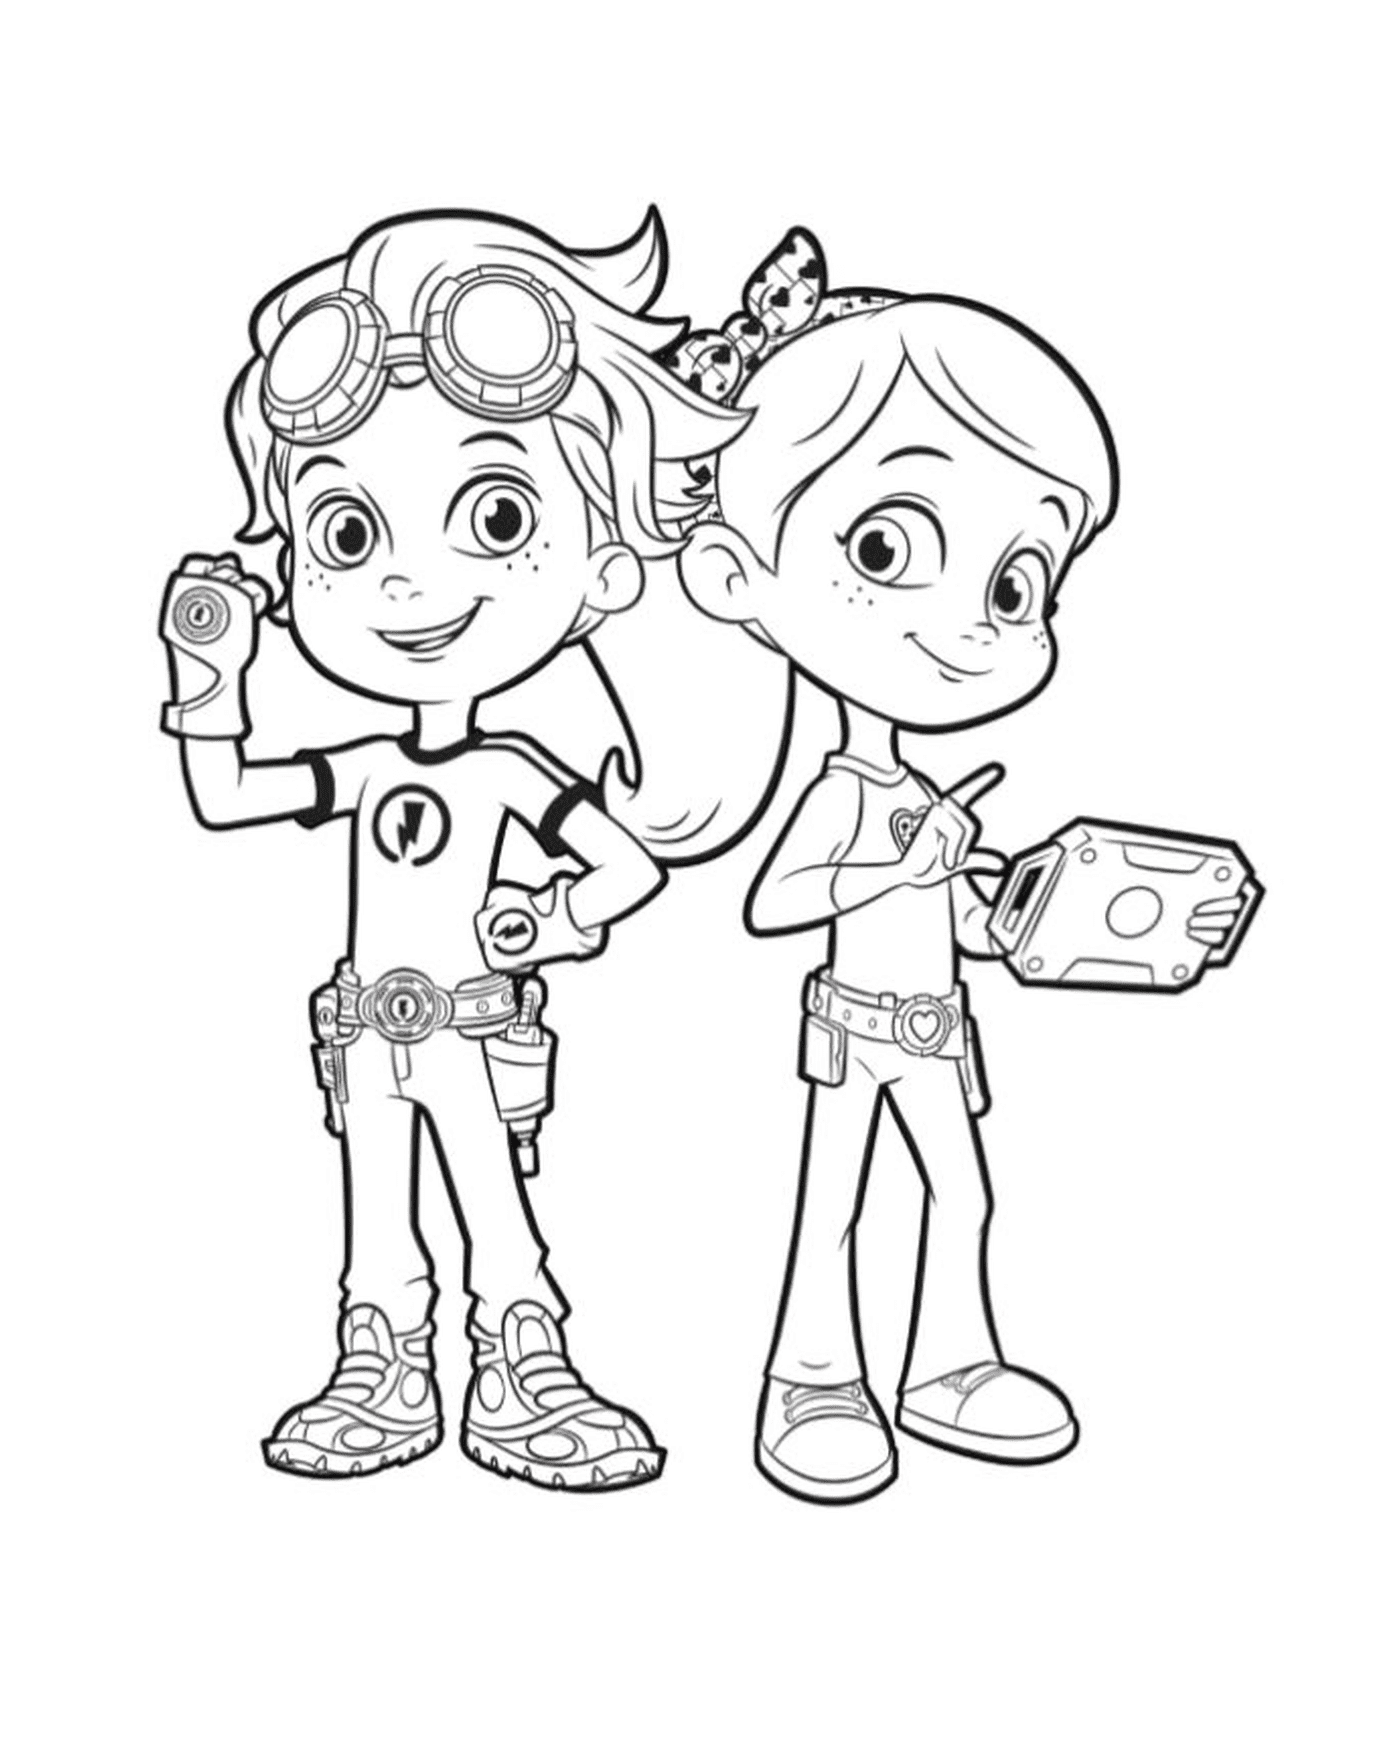  Children of Rusty and Ruby of Rusty Rivets 